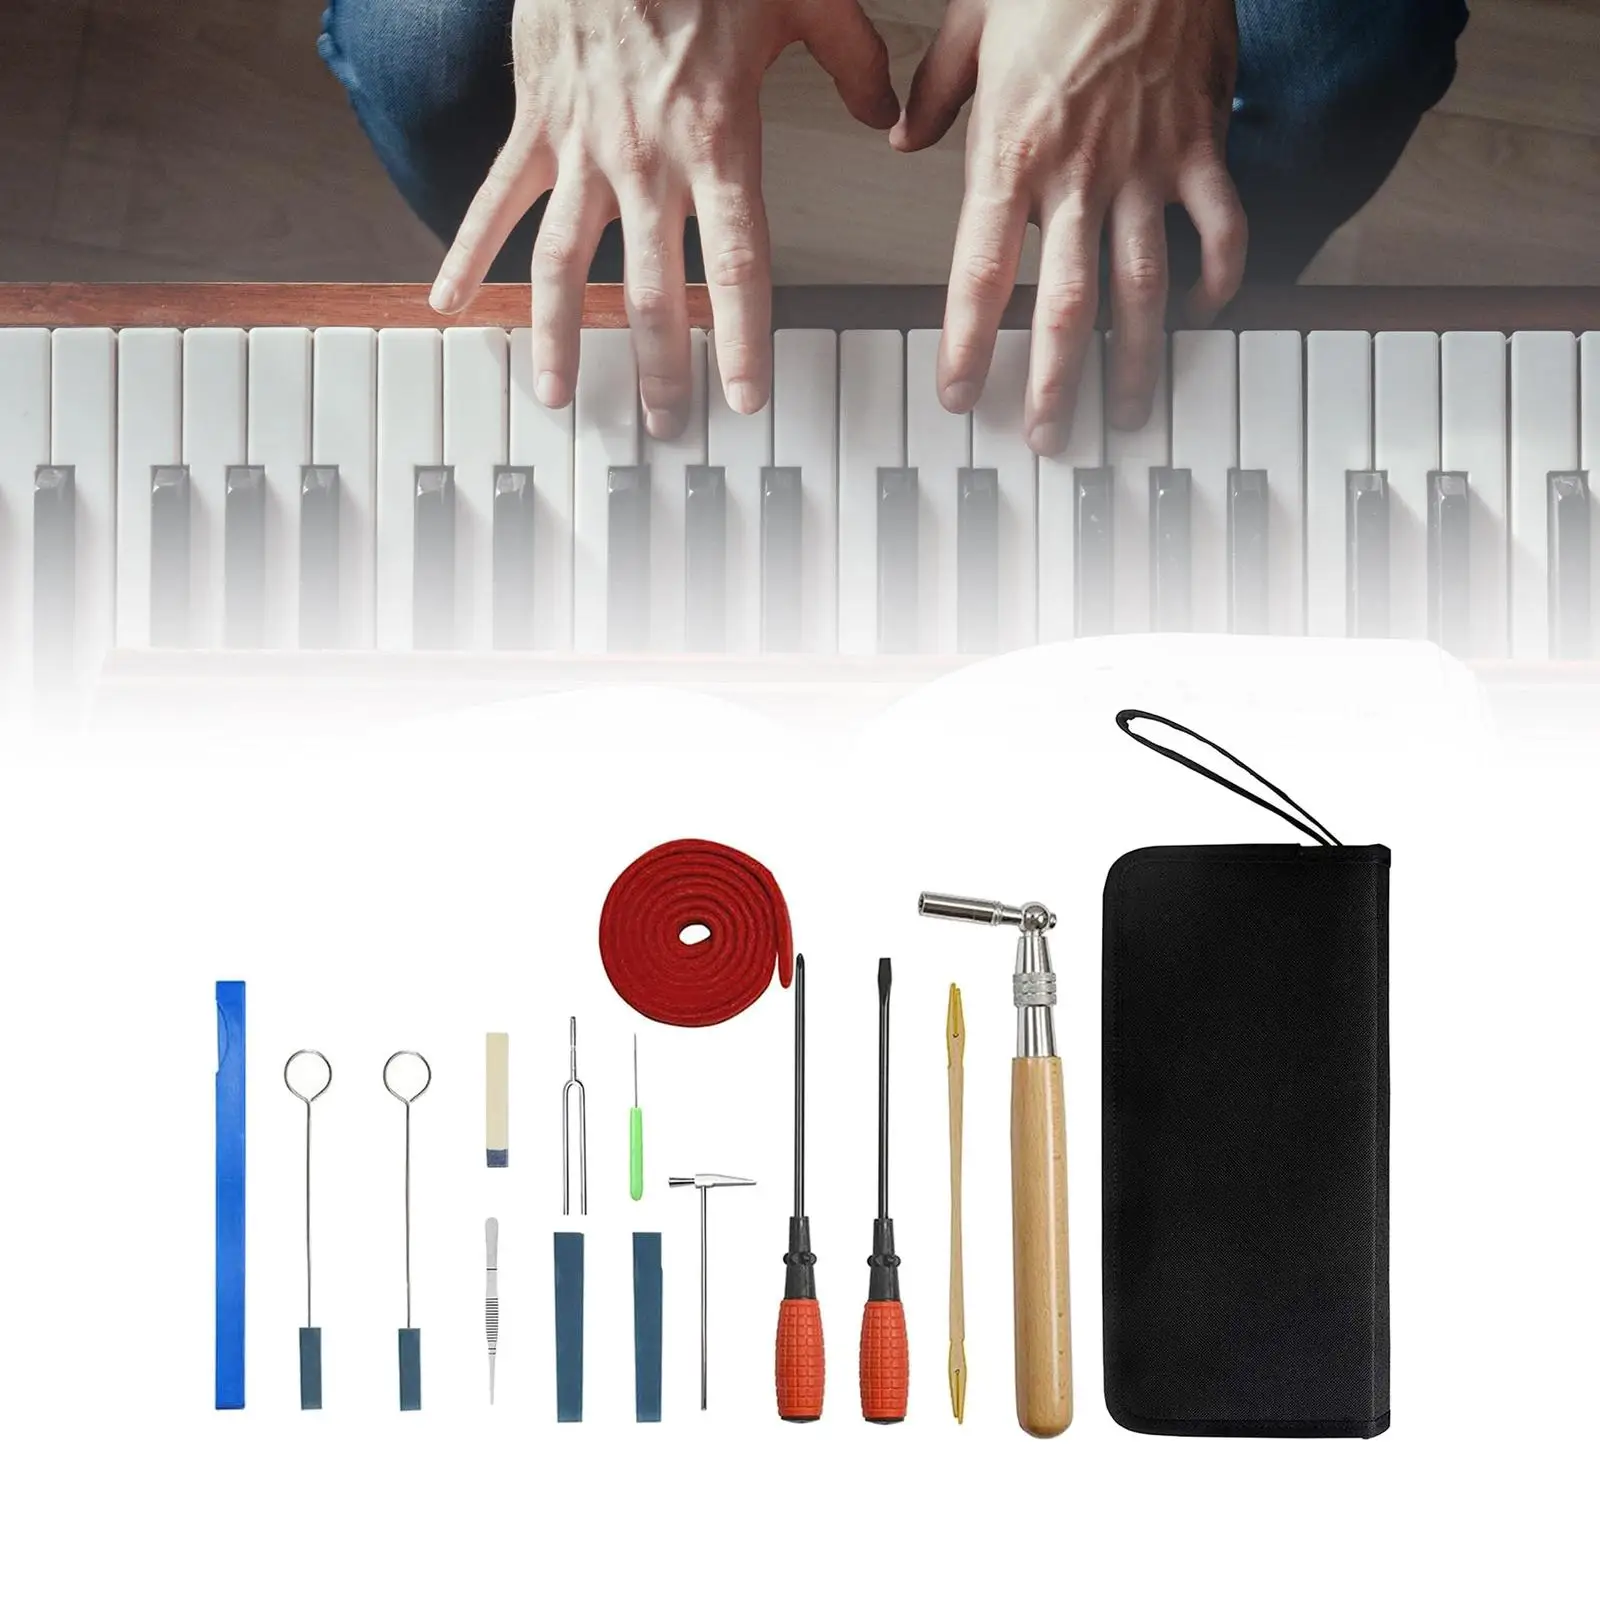 16 Pieces Professional Piano Tuning Kits with Bag Universal for Piano Tuner